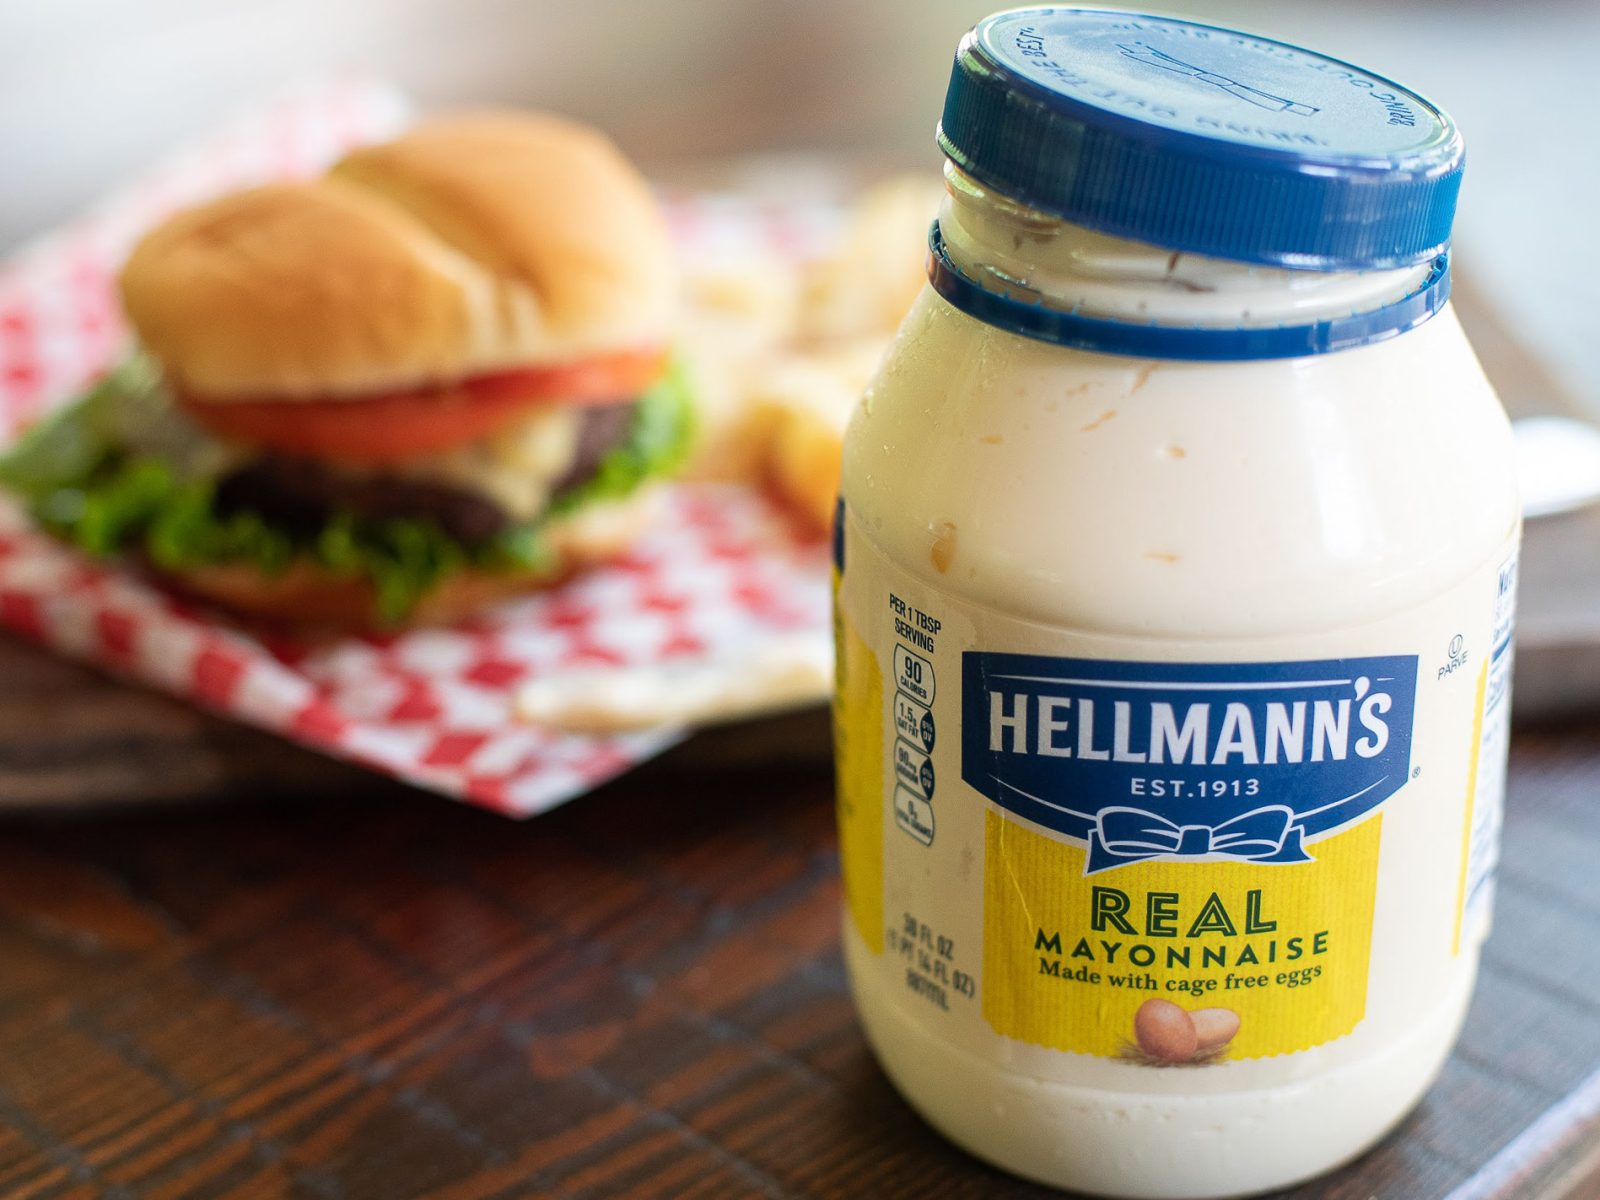 Pick Up Big Savings On Hellmann’s Mayonnaise & Have Great Taste On Hand For All Your Favorite Meals & Recipes